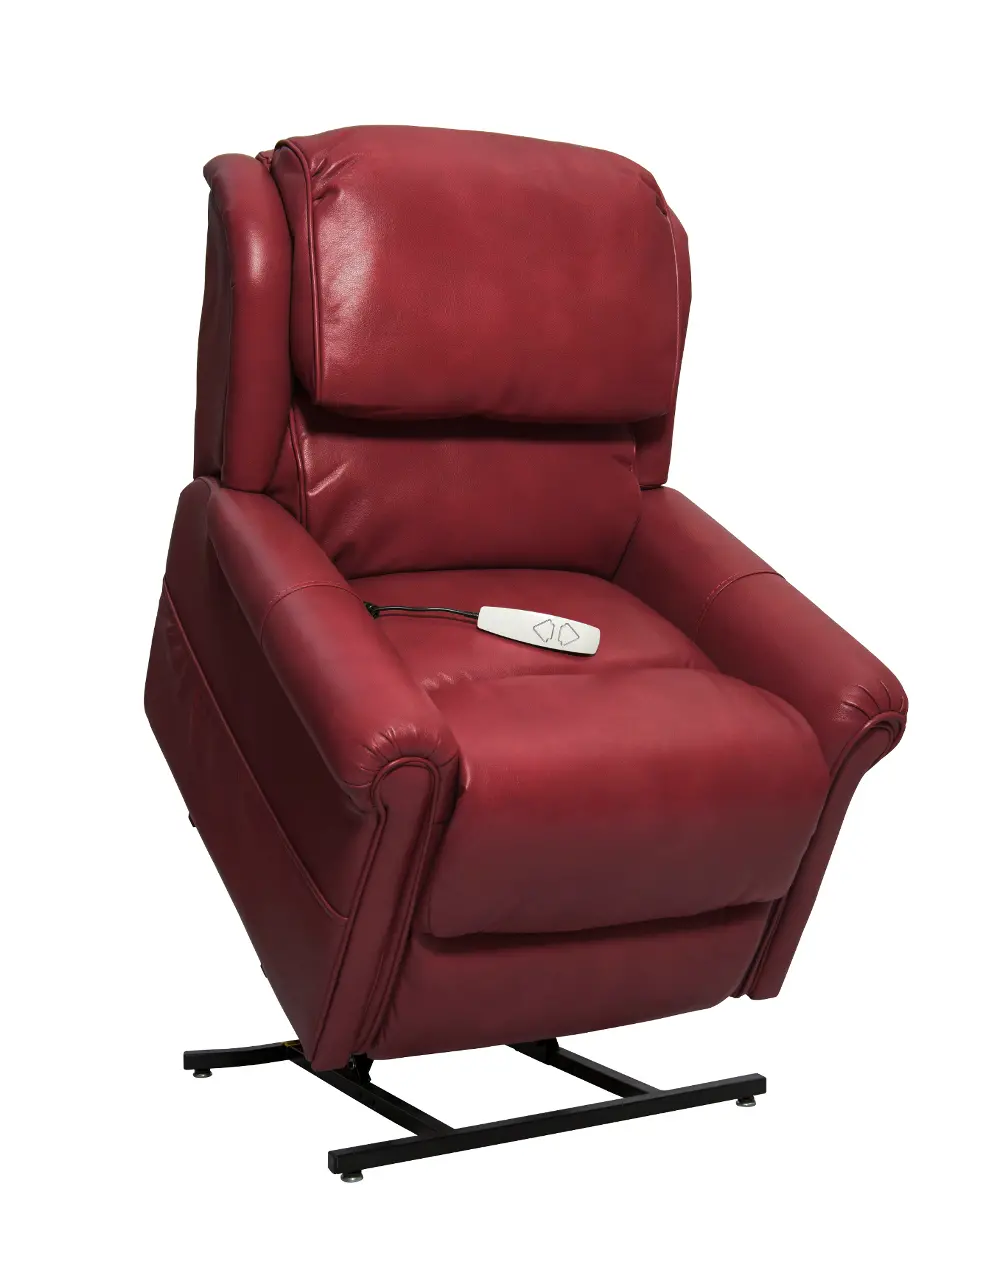 Red Power Reclining Lift Chair-1